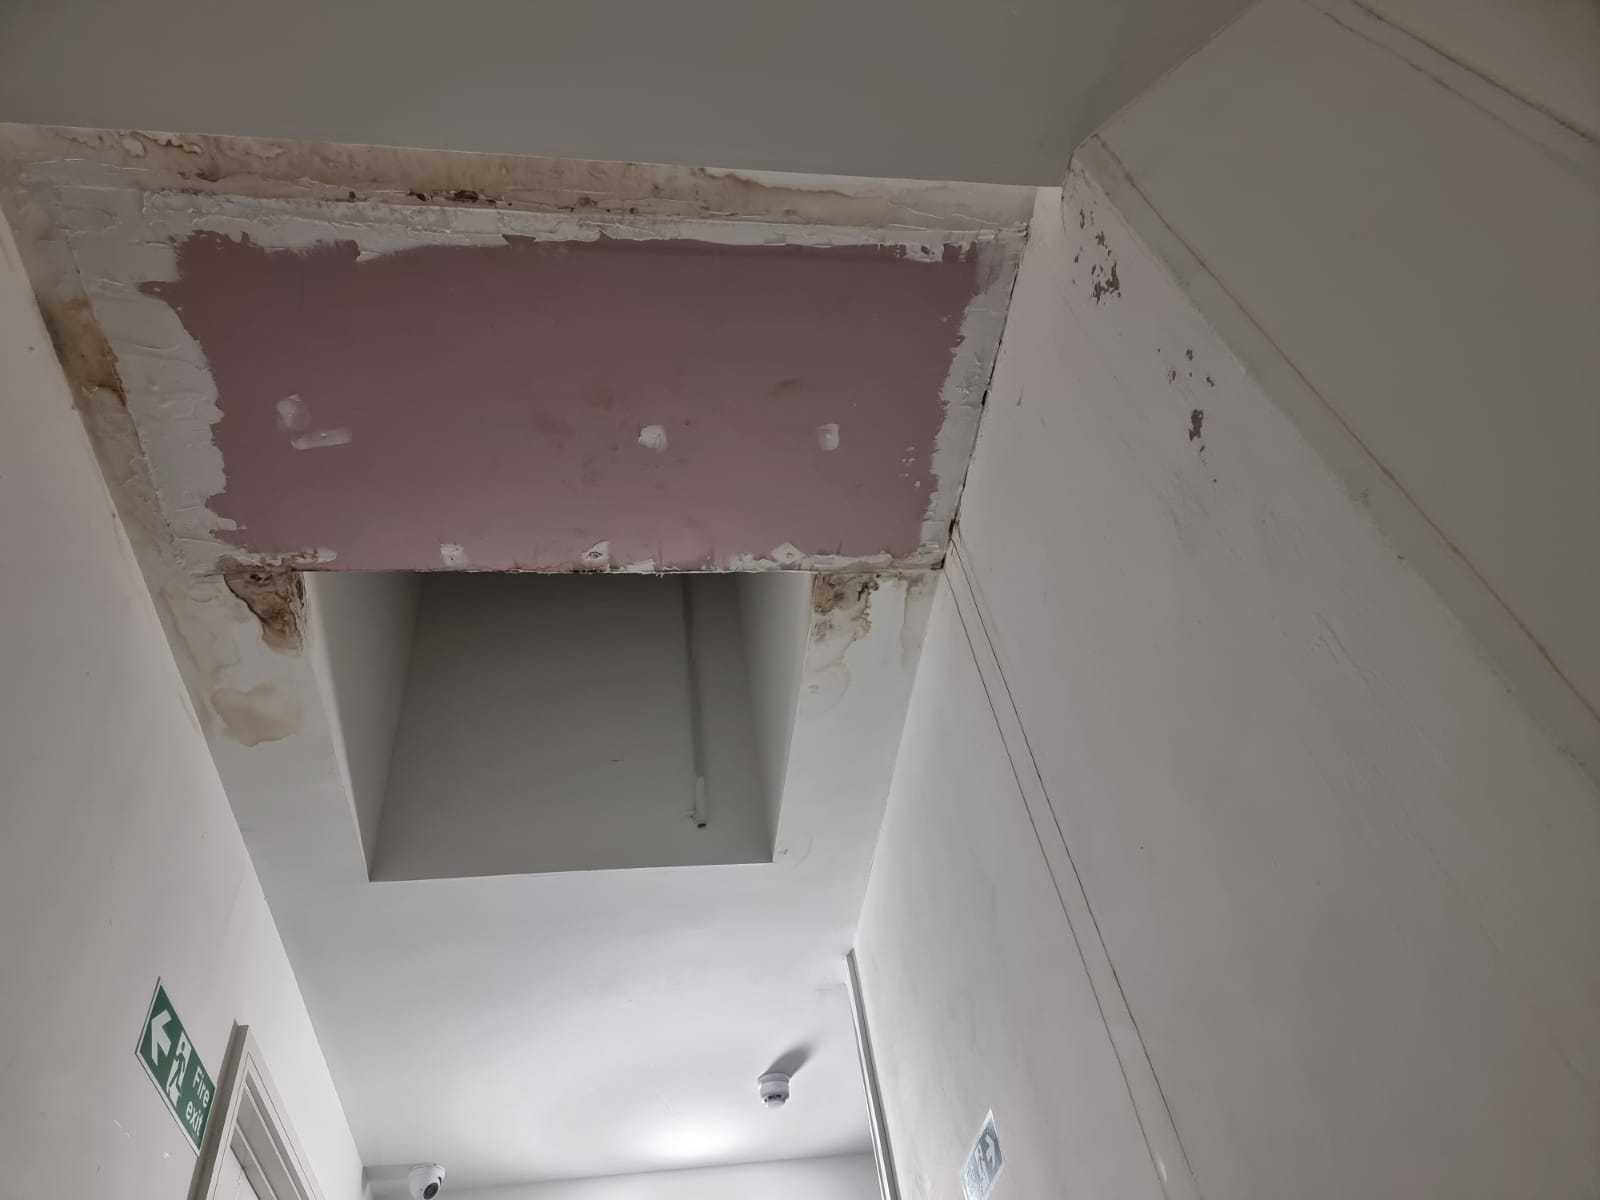 A photo showing leaks and water damage at the housing block